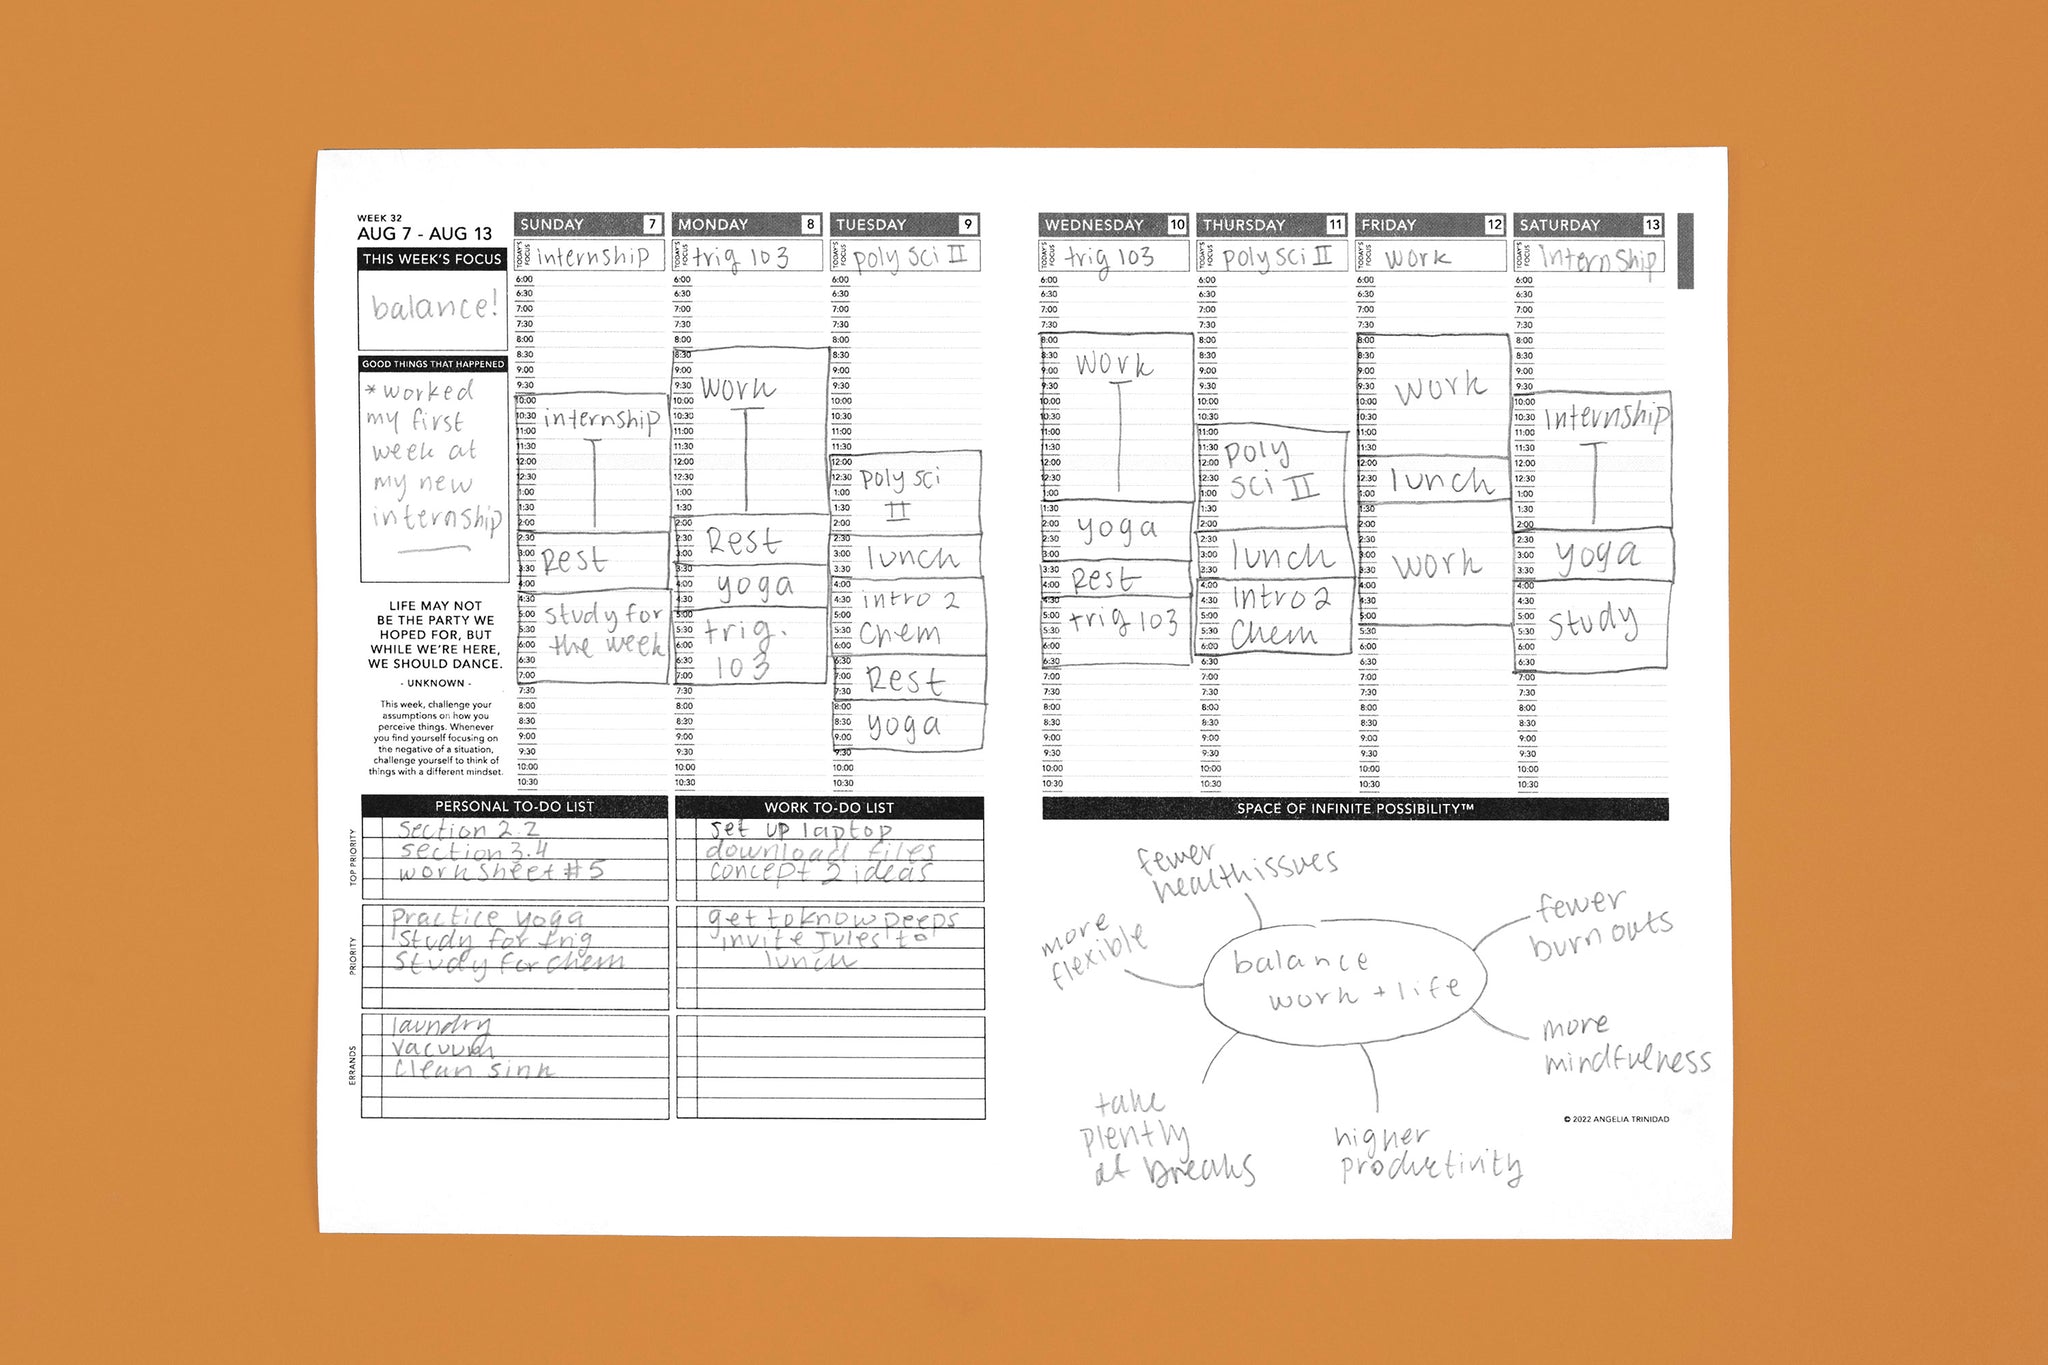 Free planner PDF printout with a mock schedule in pencil